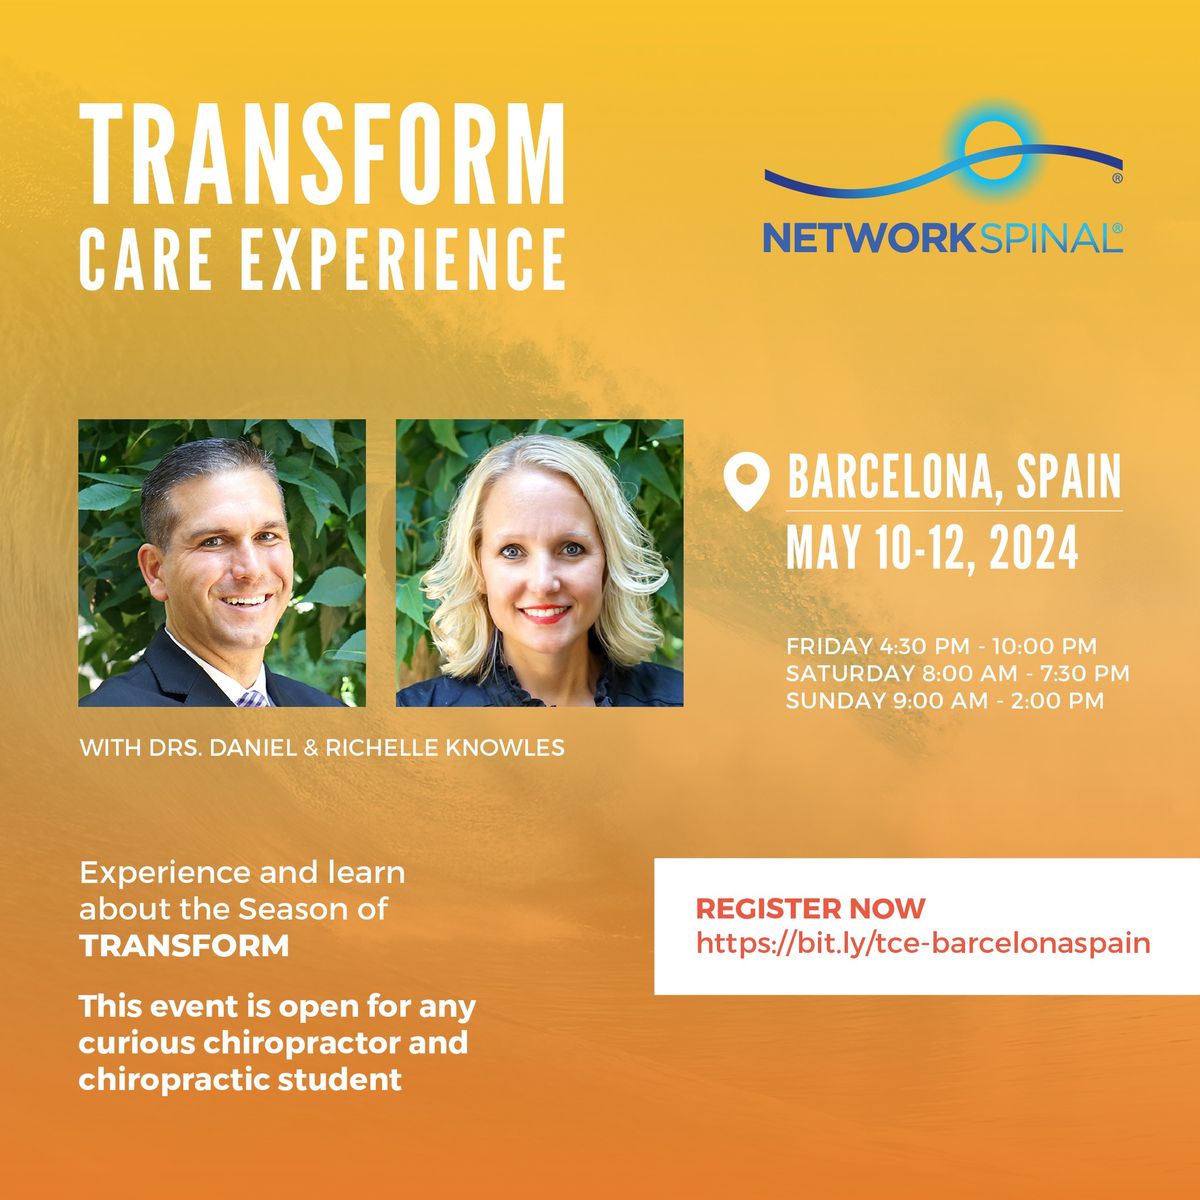 NetworkSpinal Transform Care Experience with Drs. Daniel & Richelle Knowles